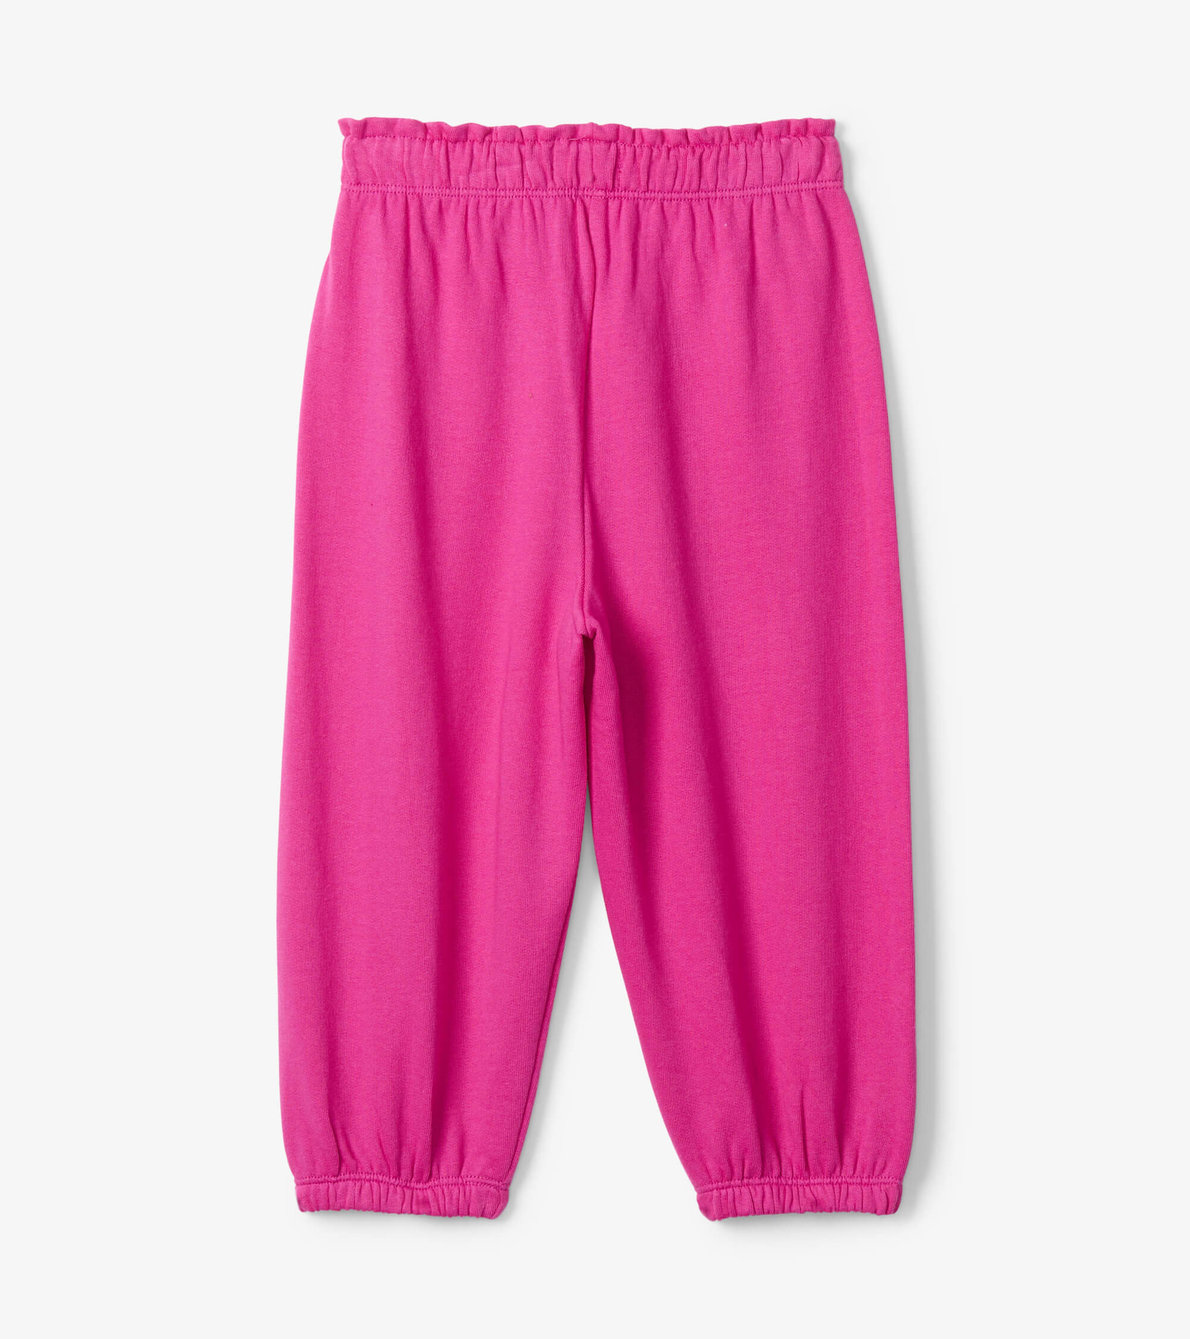 View larger image of Rainbow Violet Toddler Everywhere Pants